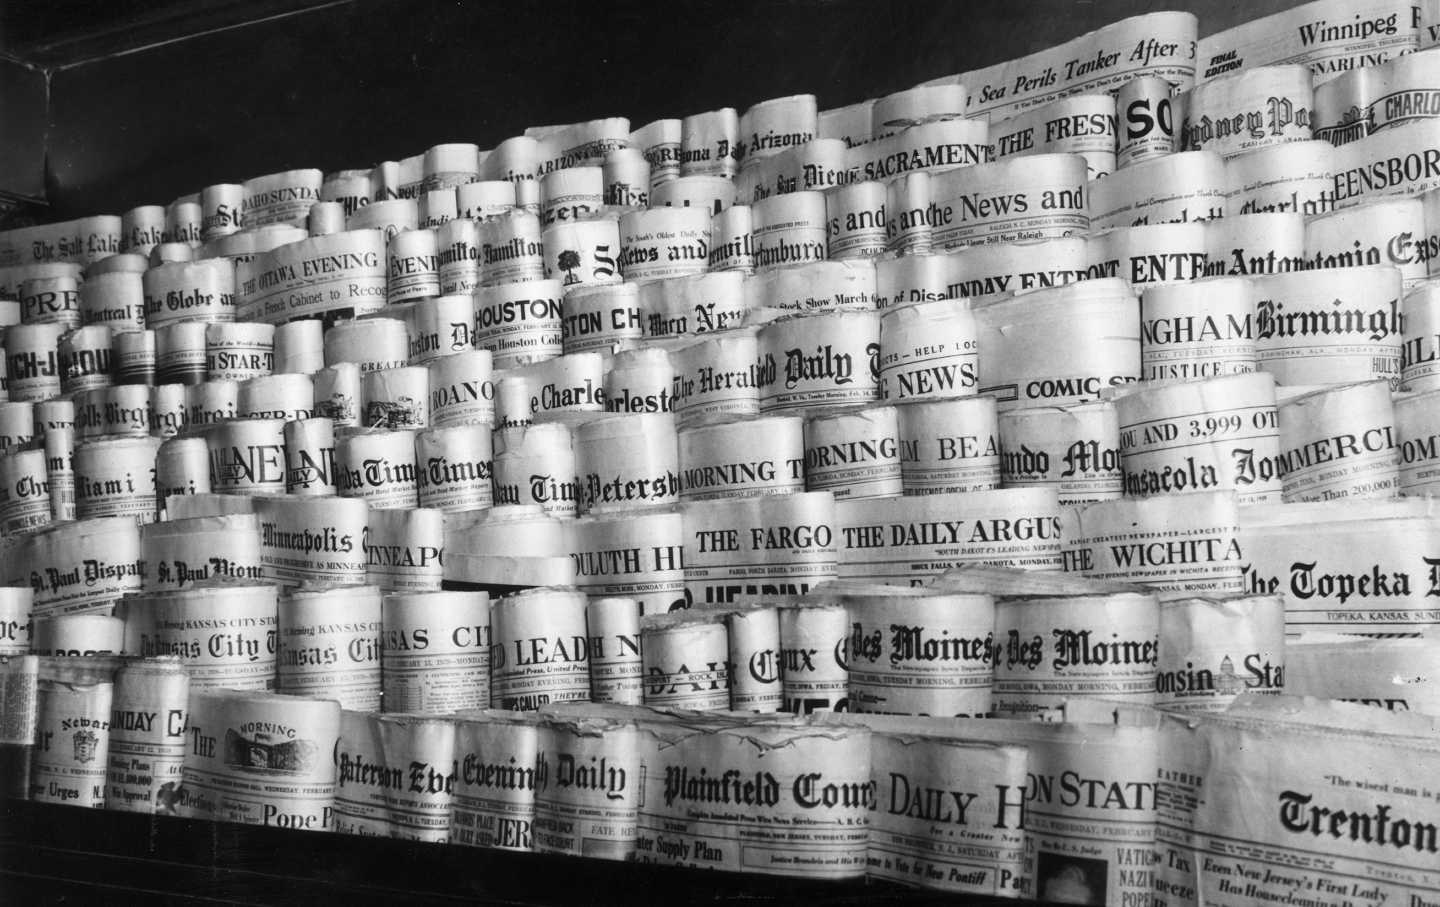 A display of dozens of local newspapers for sale on a newsstand in a black-and-white photo.